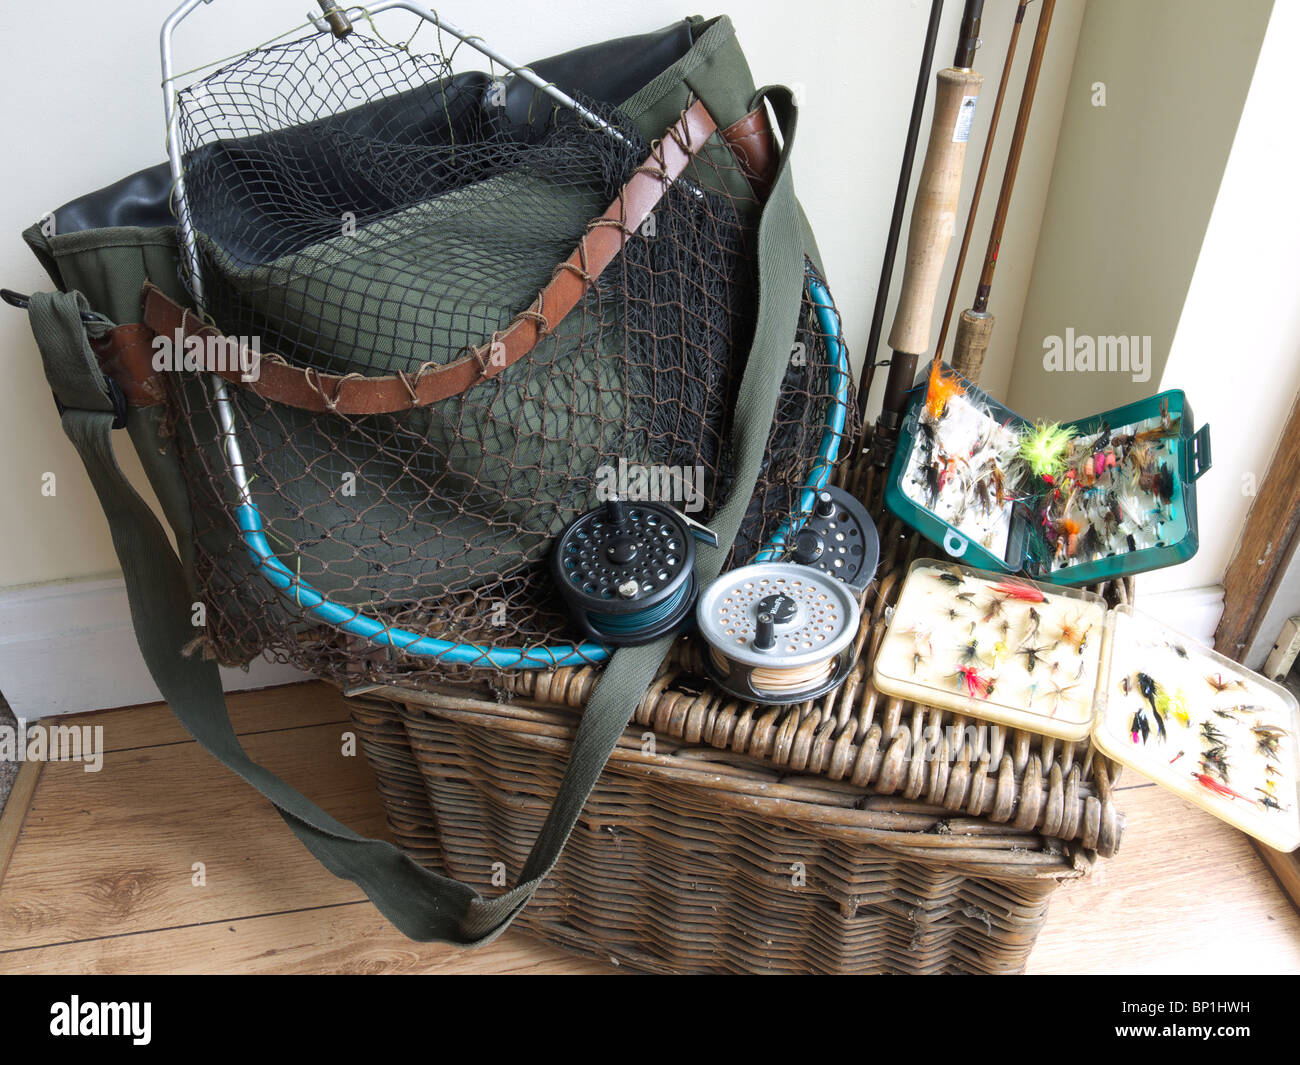 https://c8.alamy.com/comp/BP1HWH/trout-fishing-tackle-on-a-wicker-basket-england-uk-BP1HWH.jpg